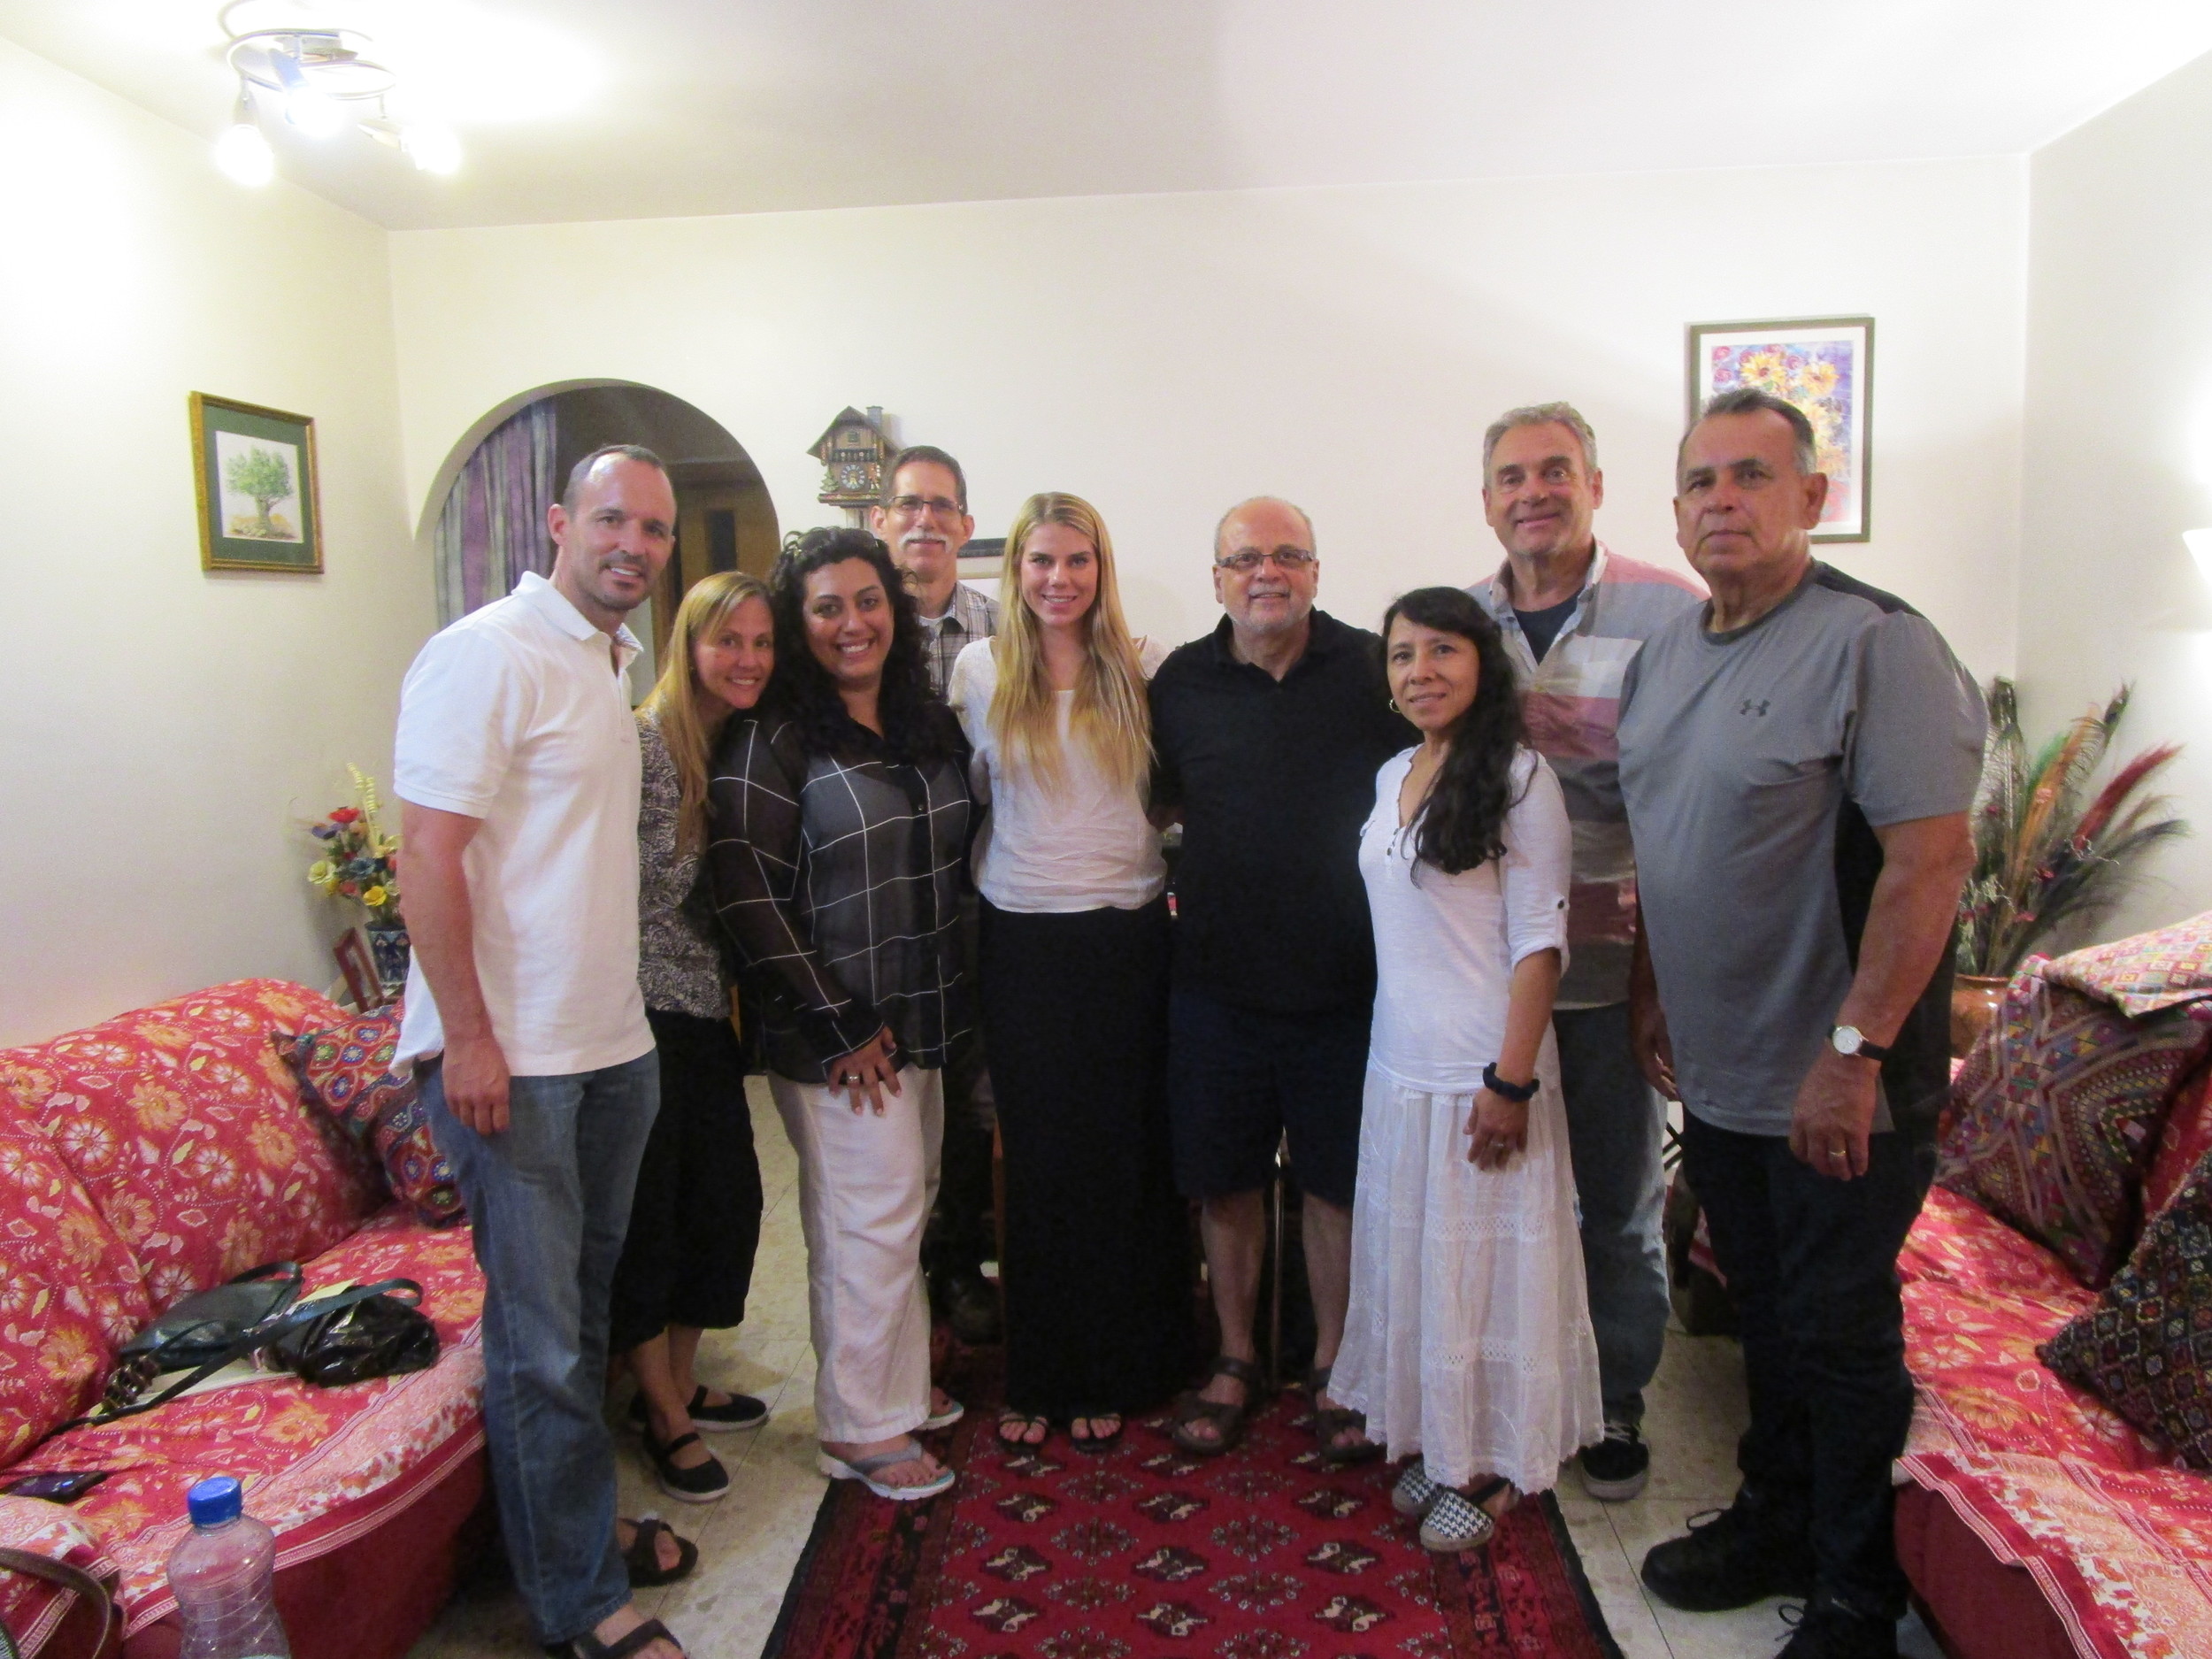  Team Israel, pictured here with Musalaha founder, Salim. 